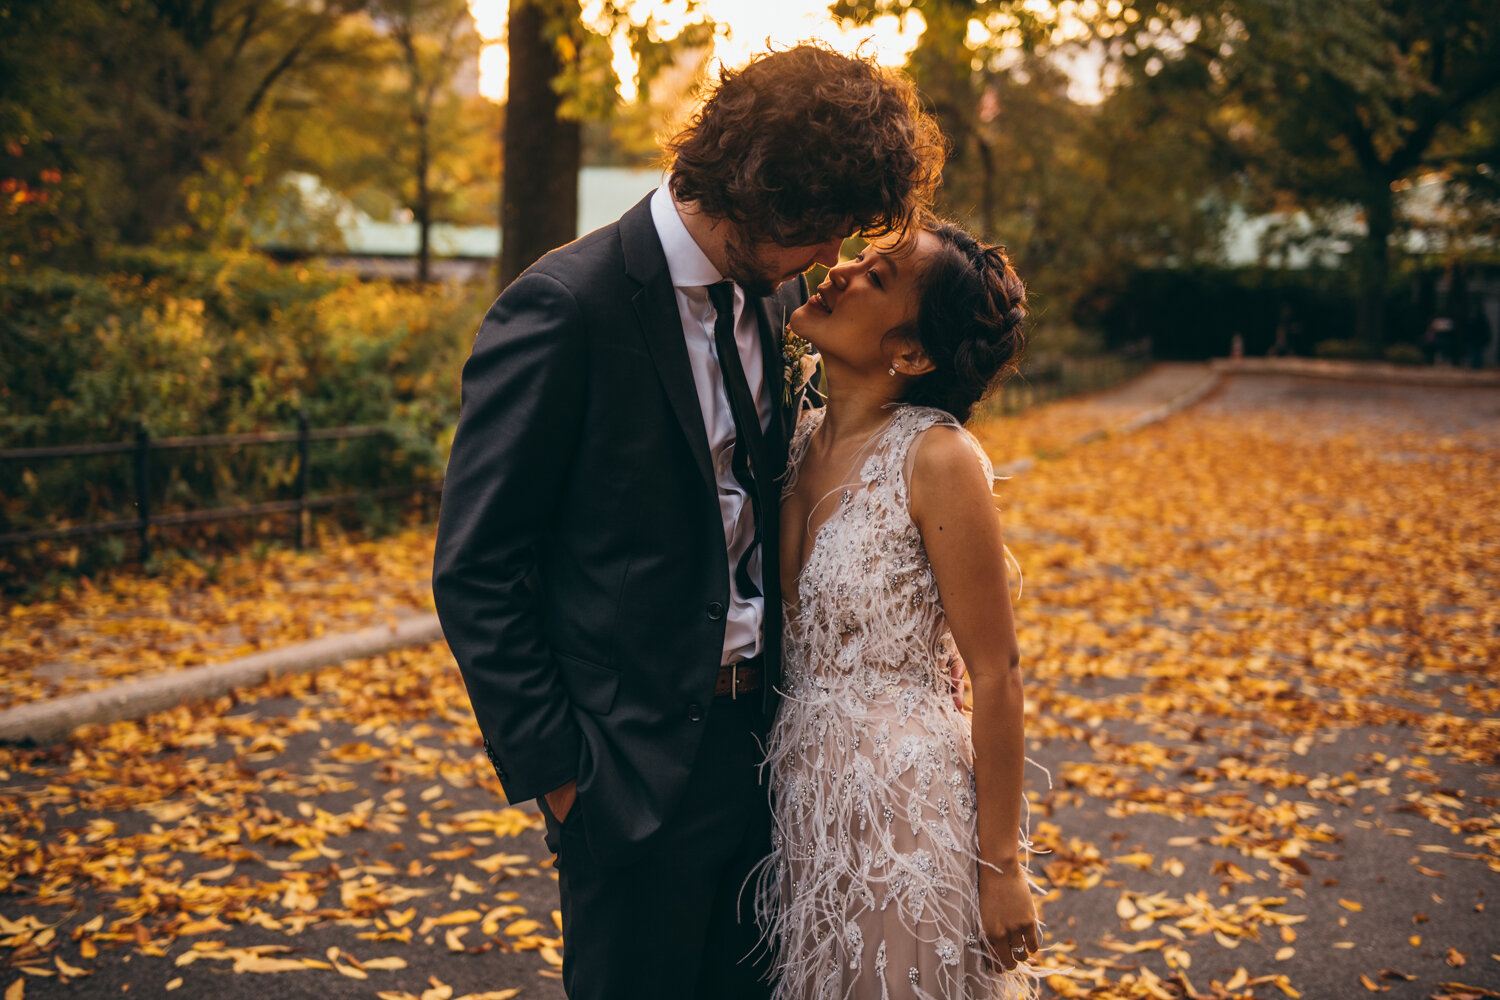 Bride and groom stand facing each other and are an inch away from a kiss. Fall foliage covers the ground behind them in Central Park.

Central Park Wedding Photography. Williamsburg Bridge Bridal Portraits. Luxury NYC Wedding Photographer. Manhattan Micro Wedding.